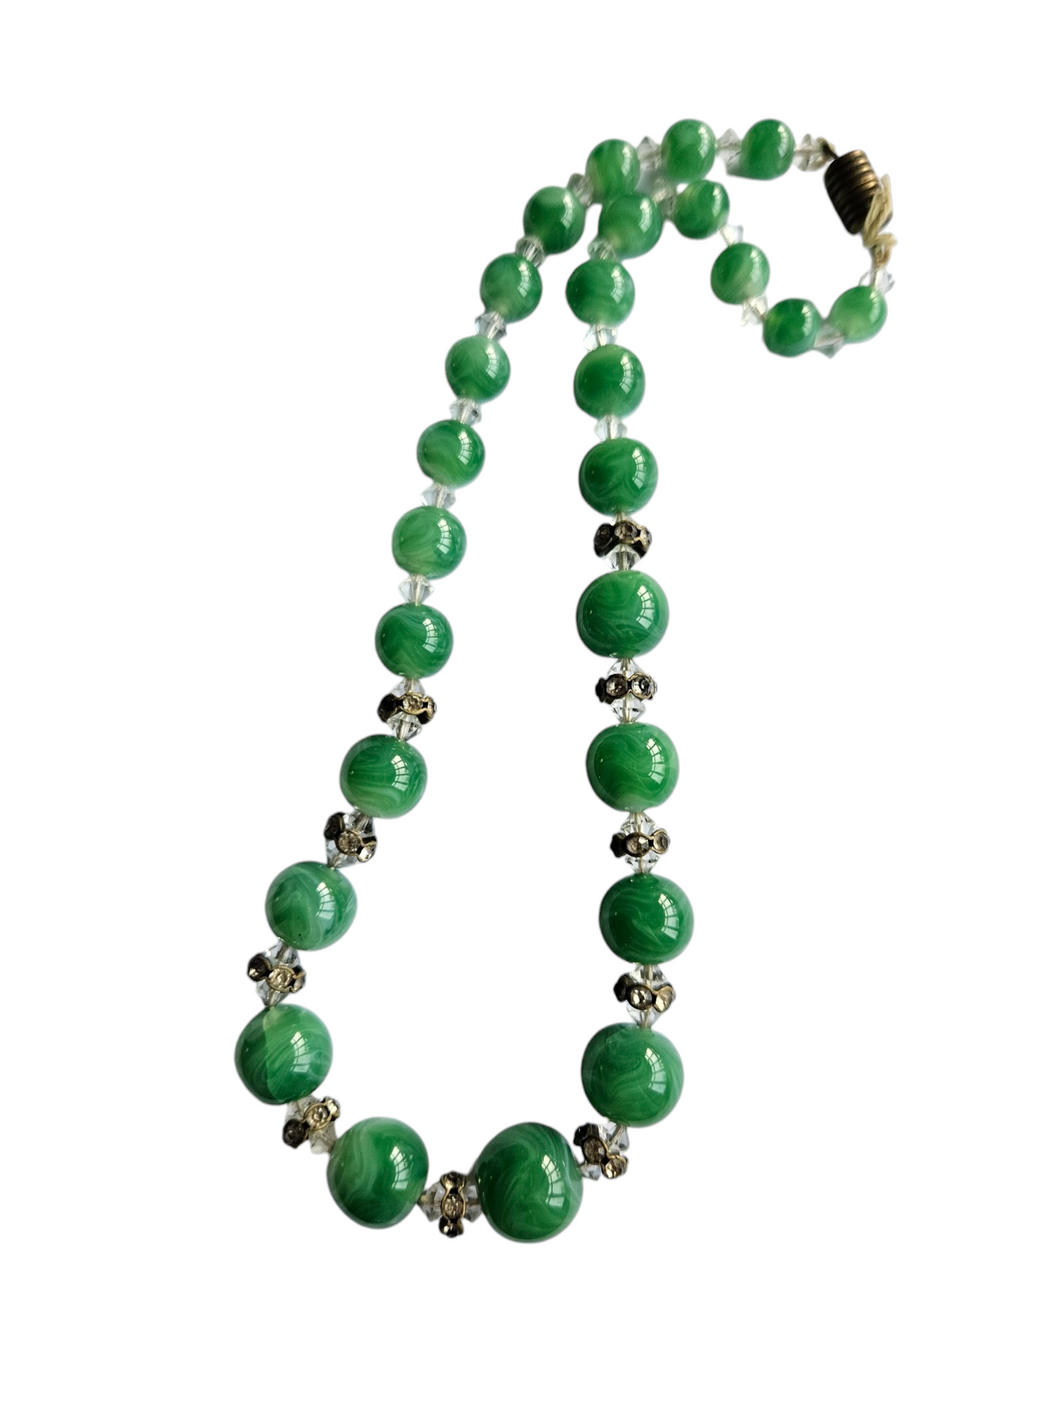 1930s Deco Green Marbled Glass and Rhinestone Necklace